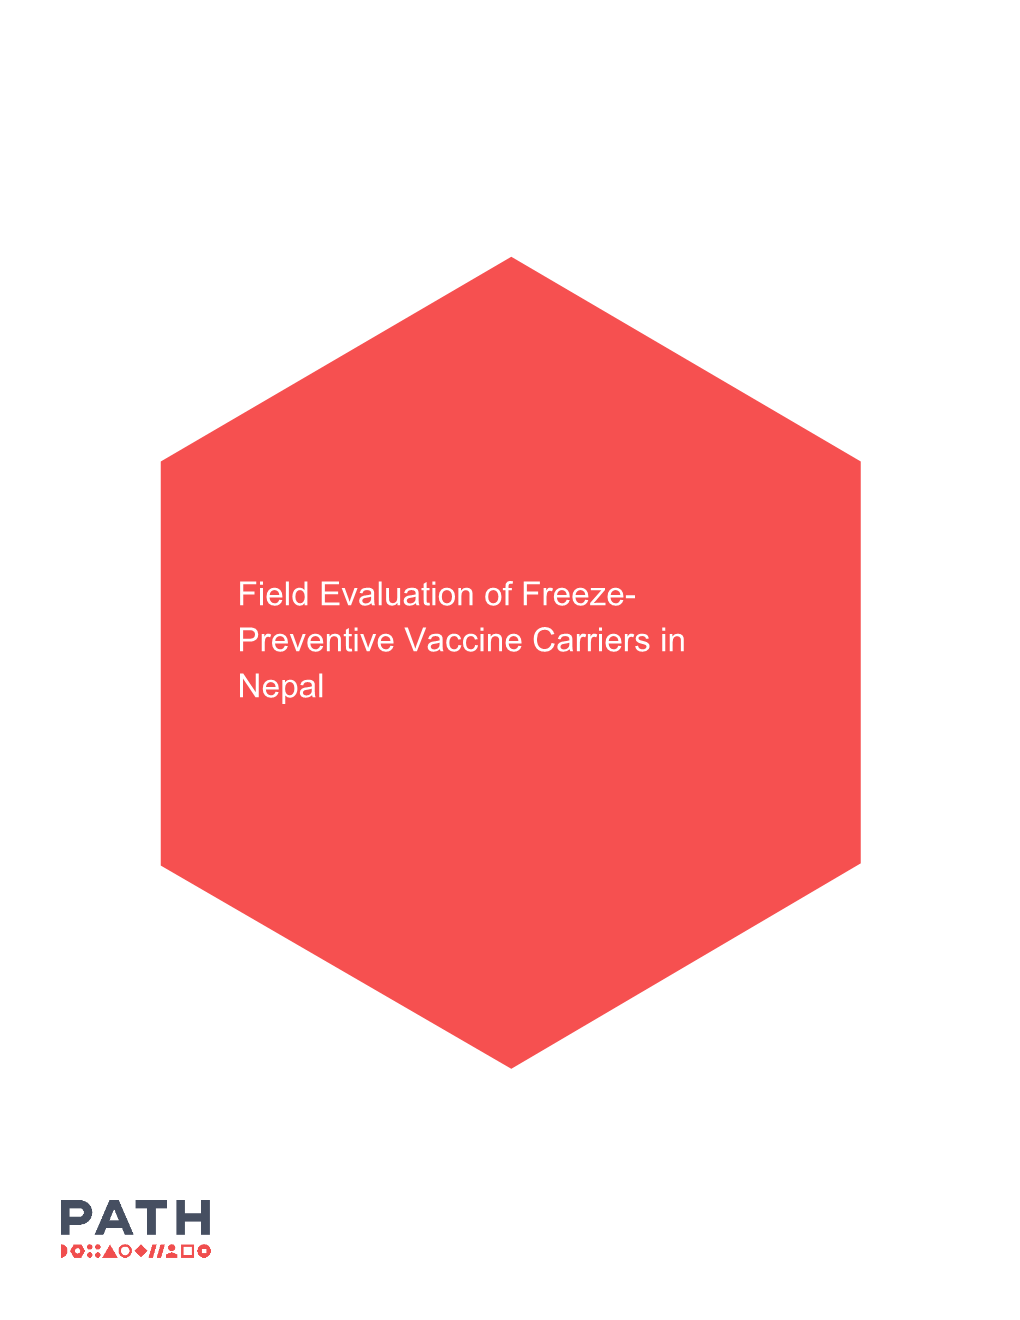 Field Evaluation of Freeze- Preventive Vaccine Carriers in Nepal